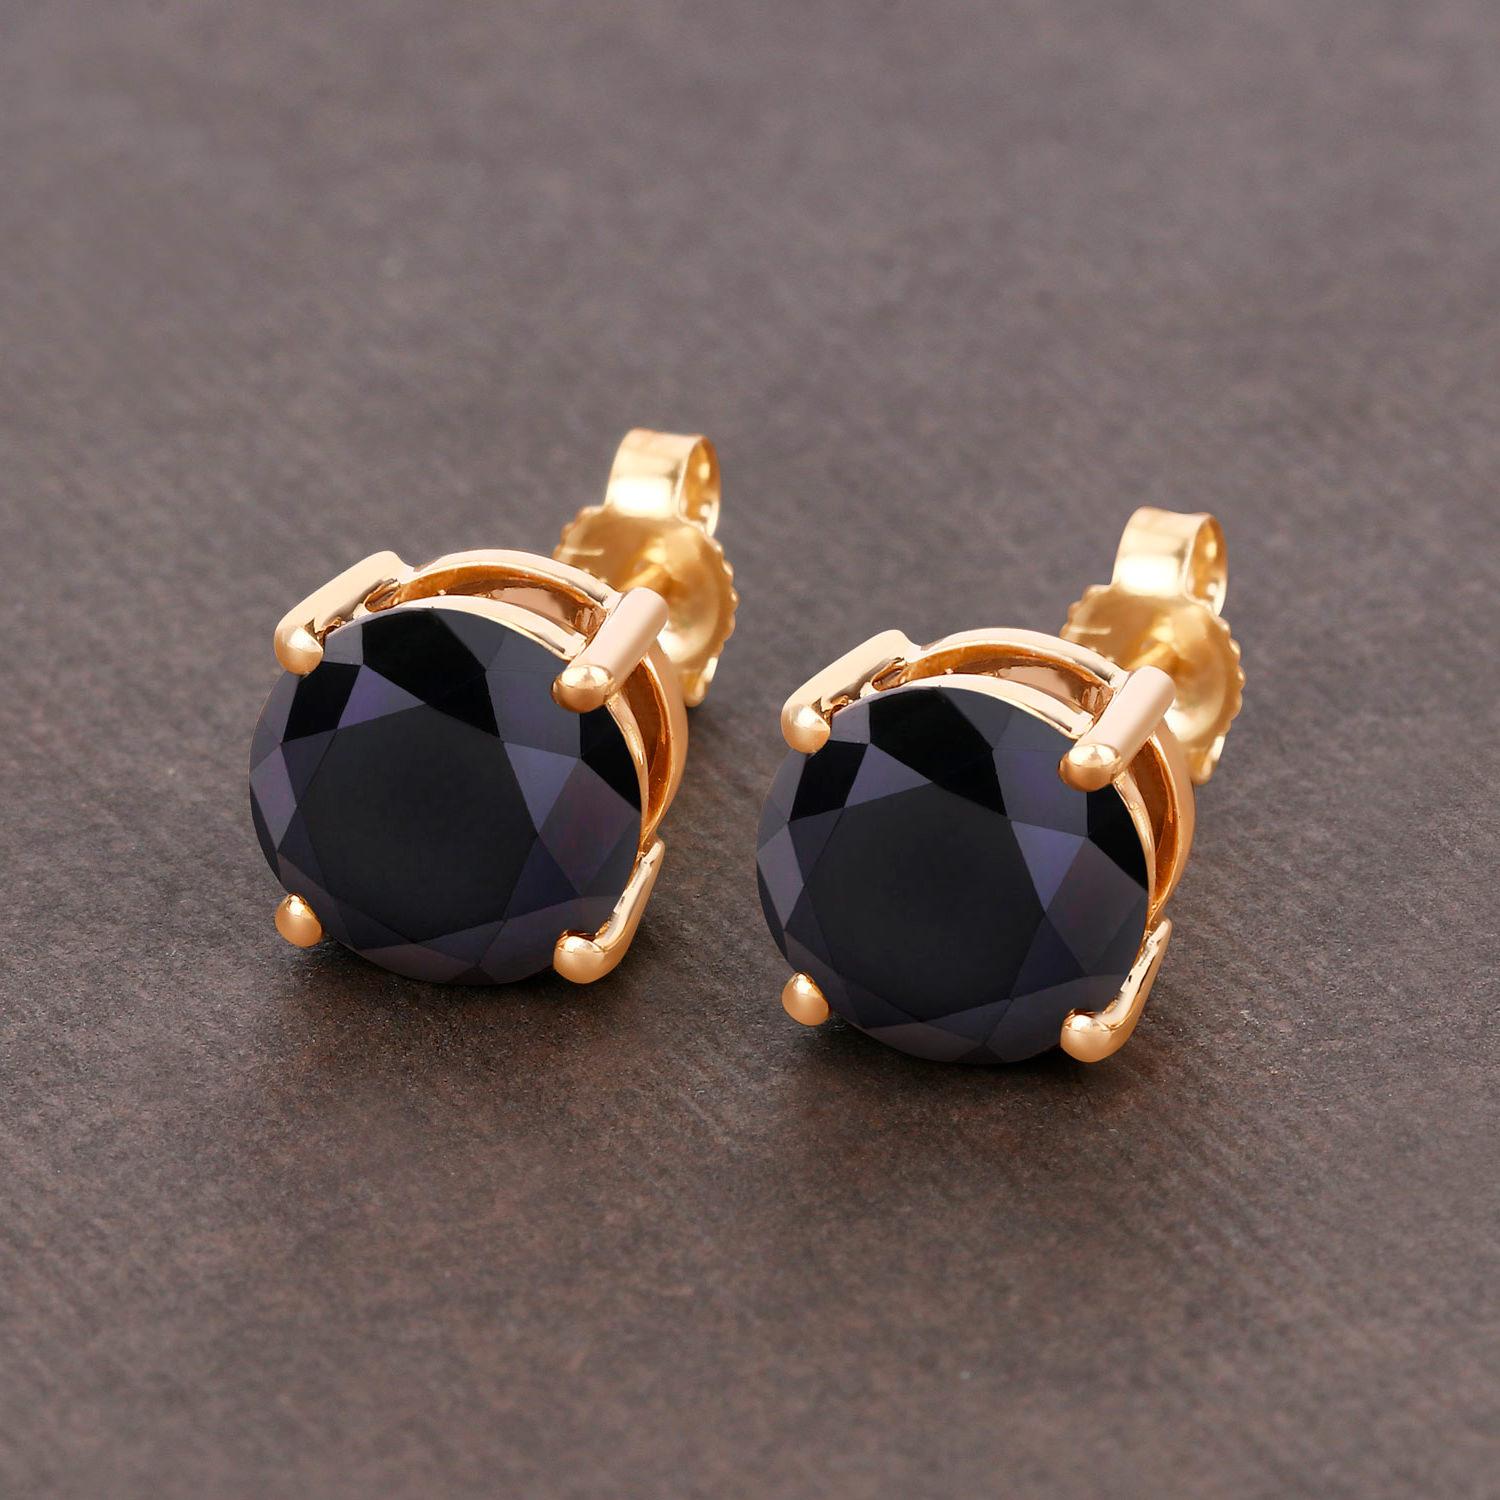 Round Cut Black Diamond Stud Earrings 5.41 Carats 14K Yellow Gold For Sale